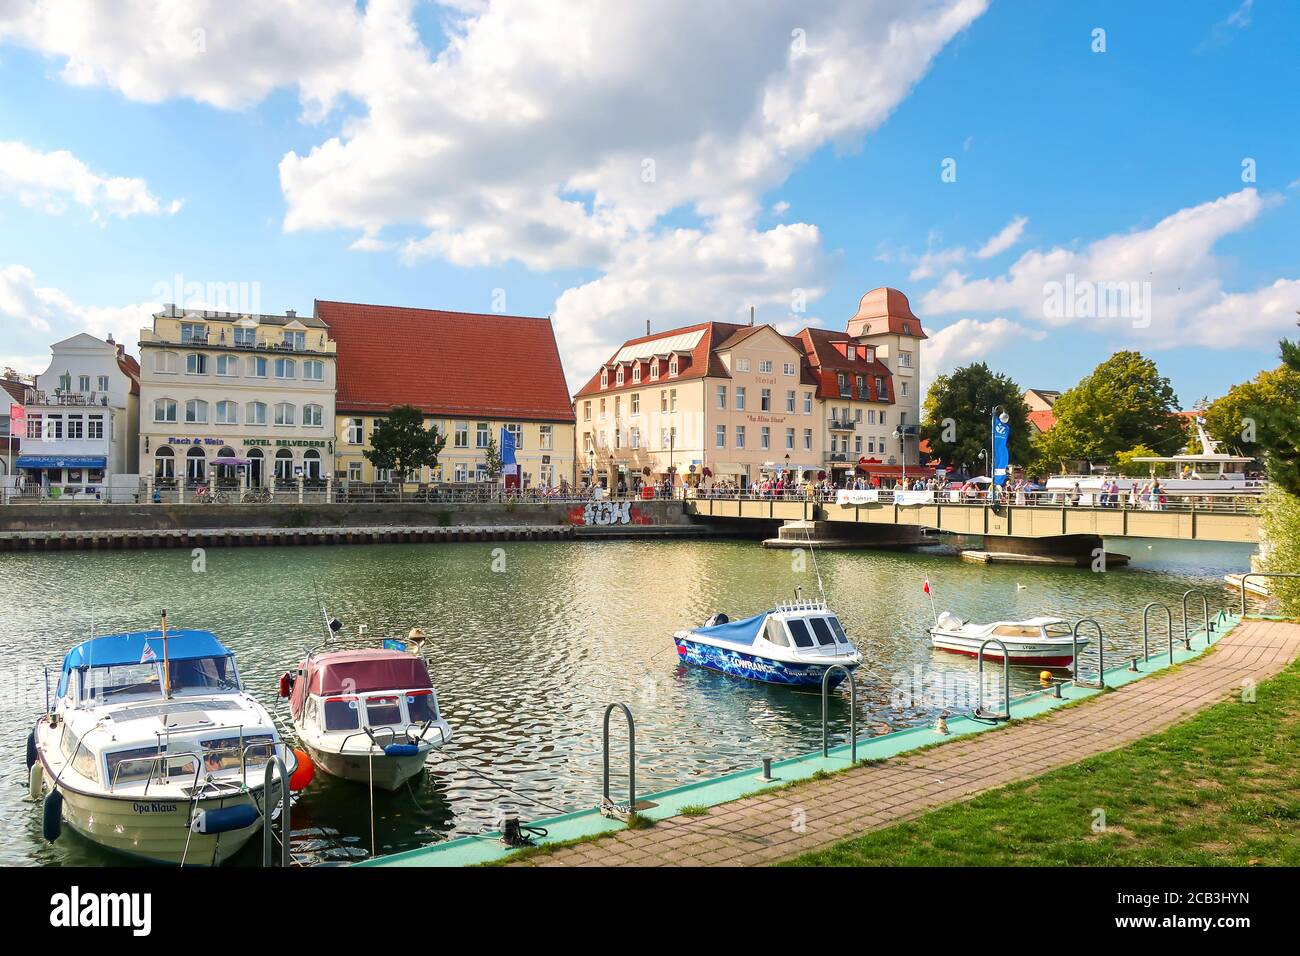 The colorful Baltic coastal village of Warnemunde Rostock, Germany, with boats in the Alter Strom canal and tourists enjoying a summer day. Stock Photo